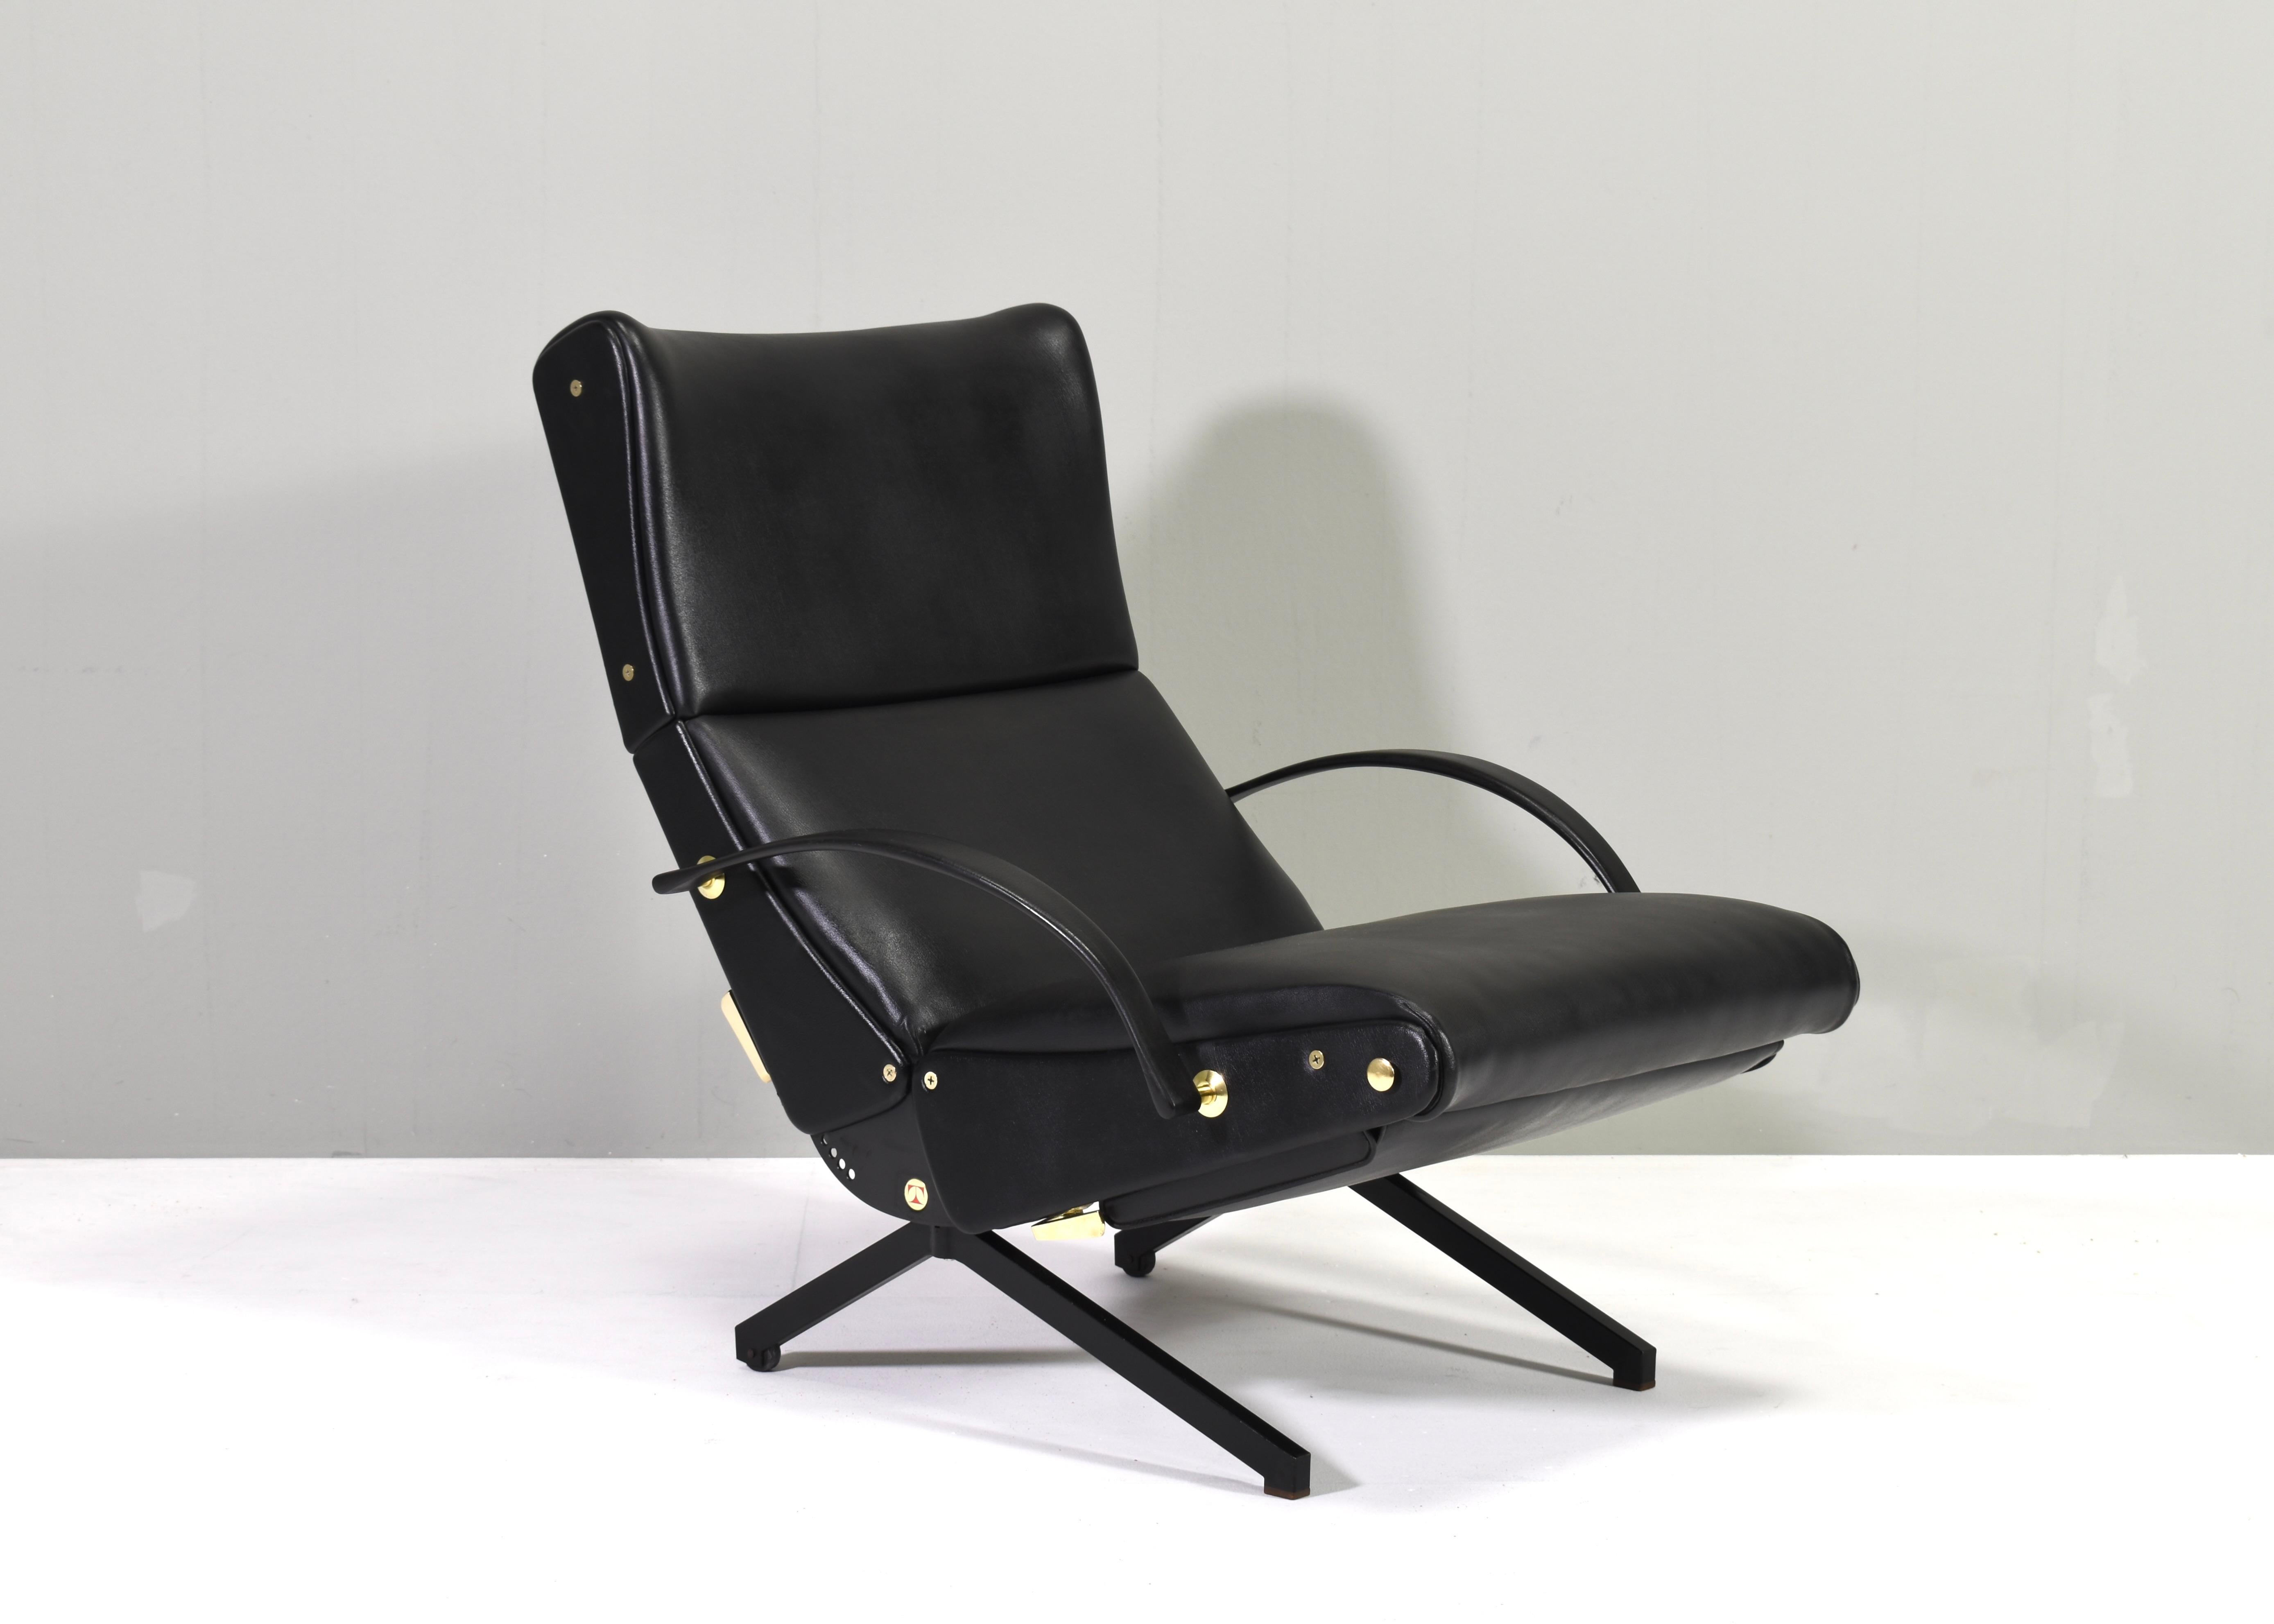 Introducing this excellent and still completely original P40 lounge chair by Osvaldo Borsani for TECNO Italy, circa 1960. If you are looking for a design period original in gorgeous condition, this is the one!
Elevate your living space with the